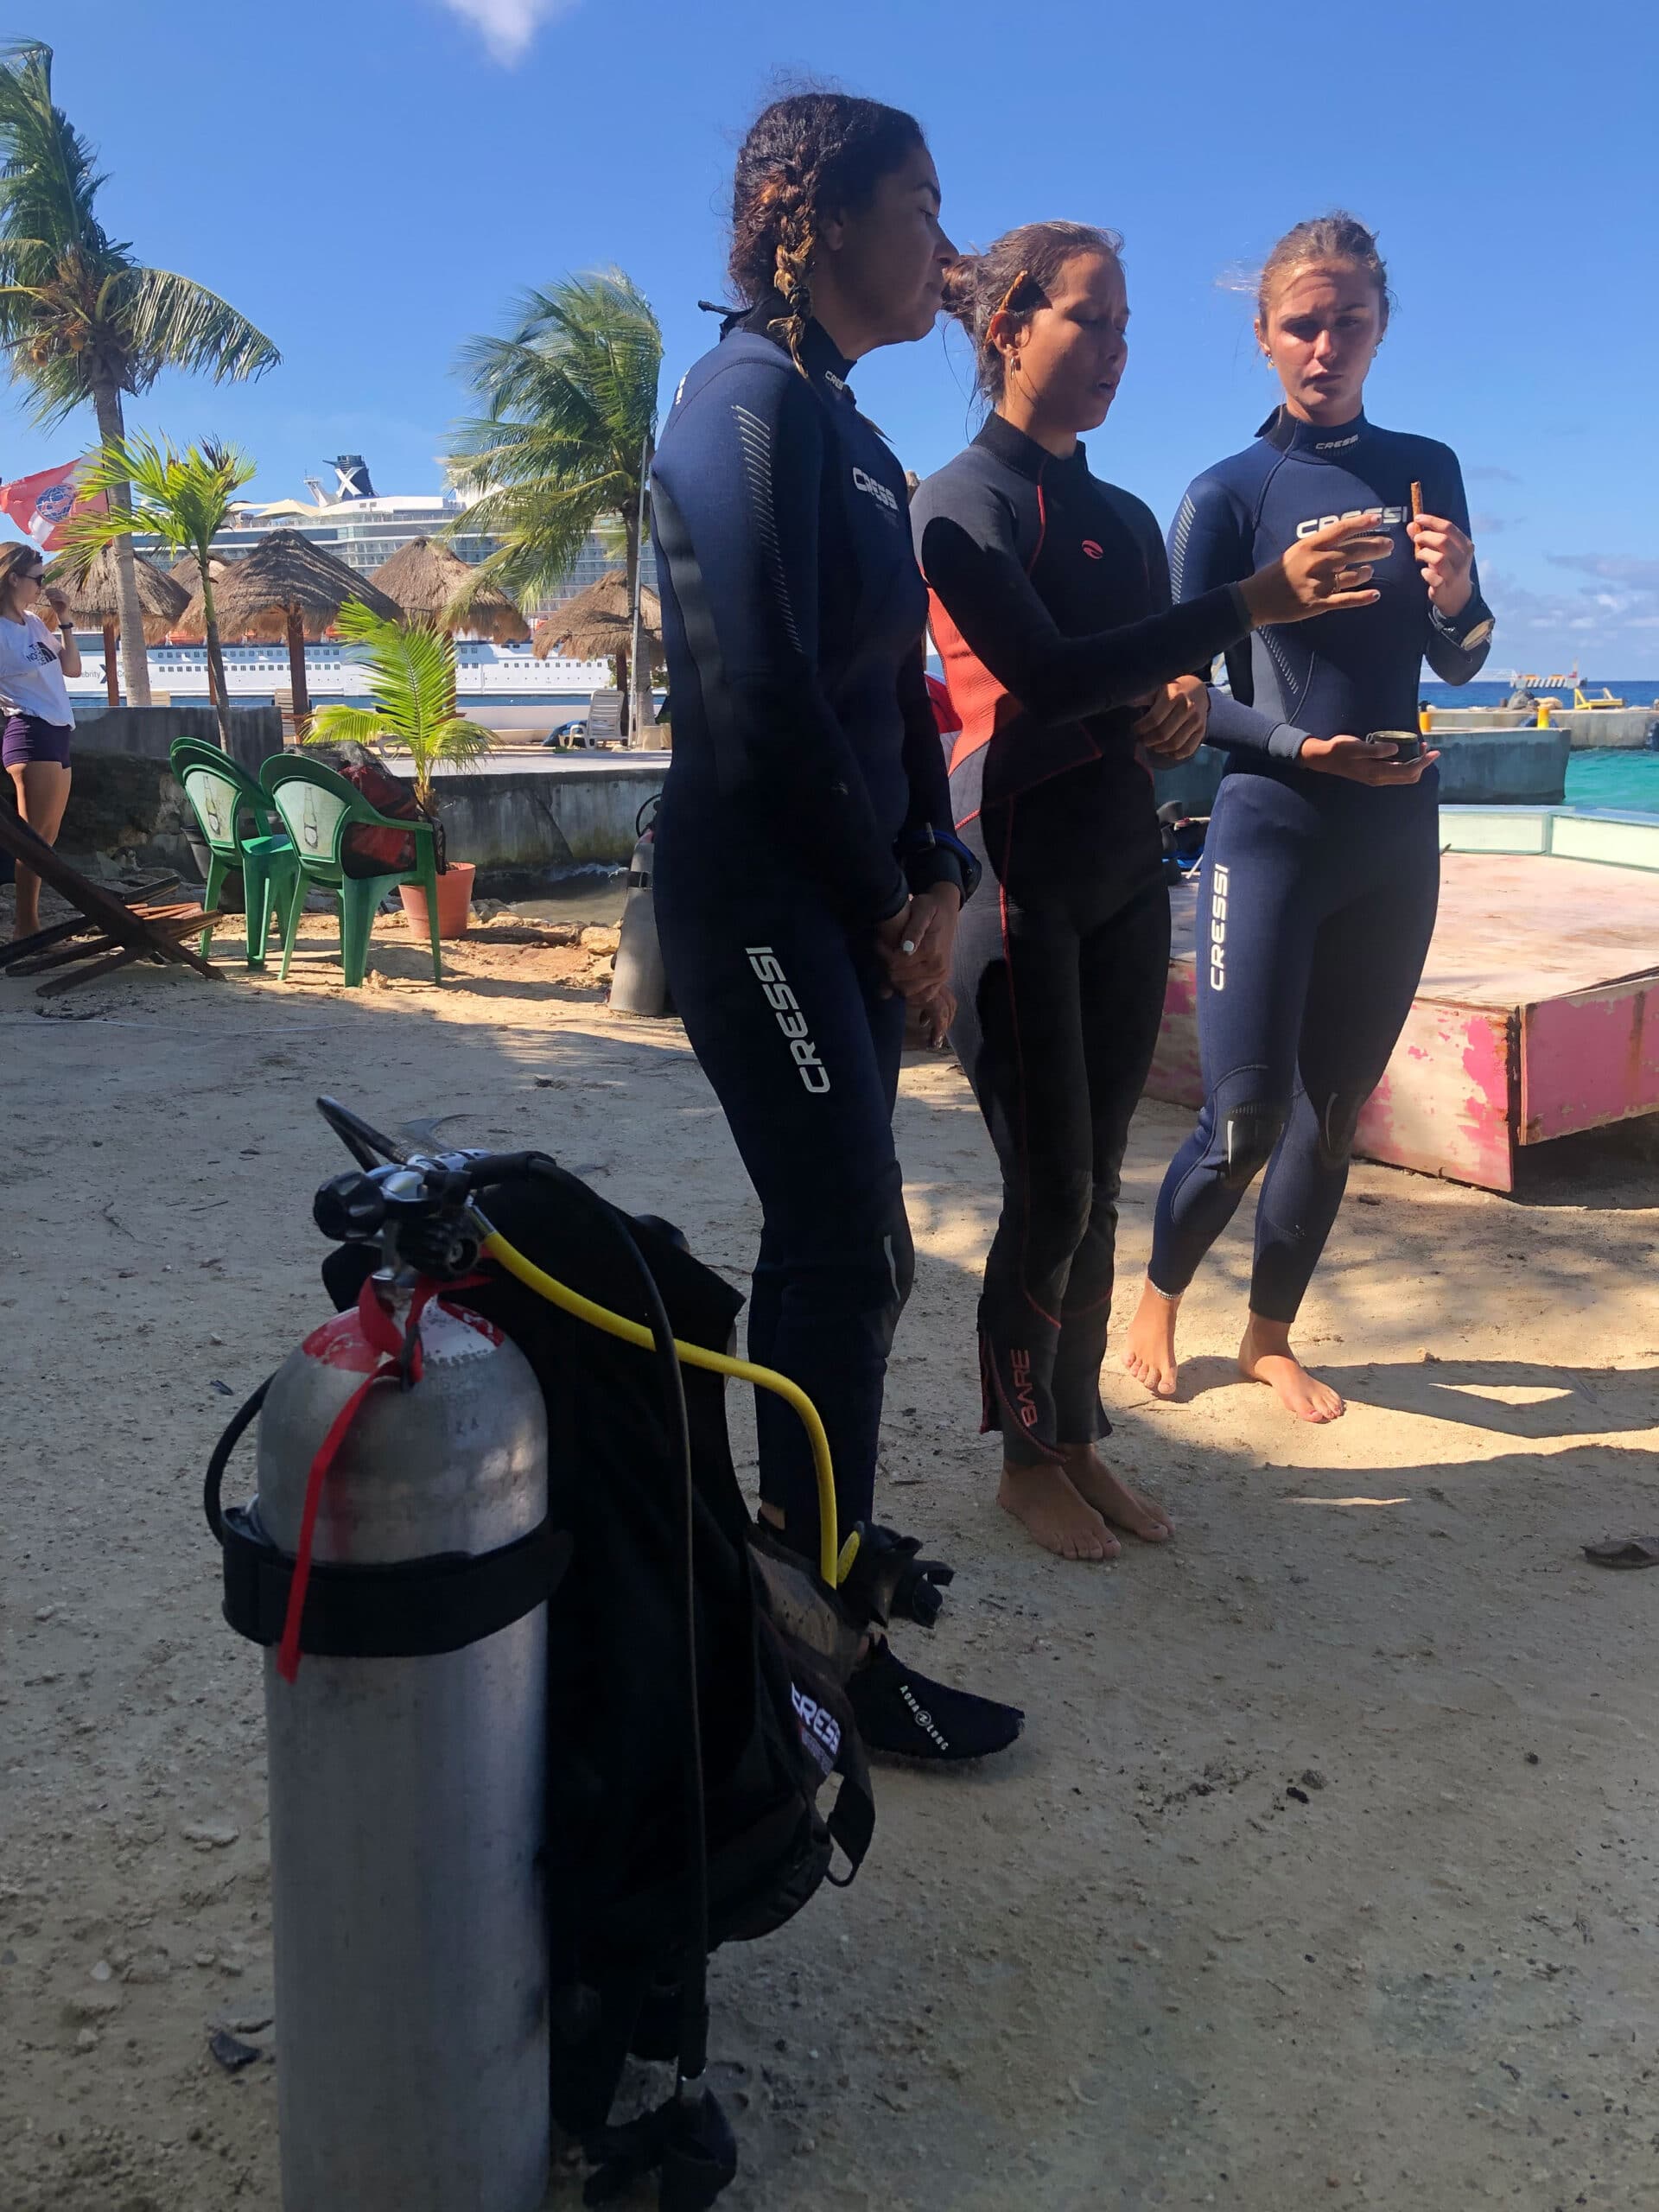 A Blue Mystic instructor reviews diving techniques and skills on the shore before entering the water for the lessons of the day.